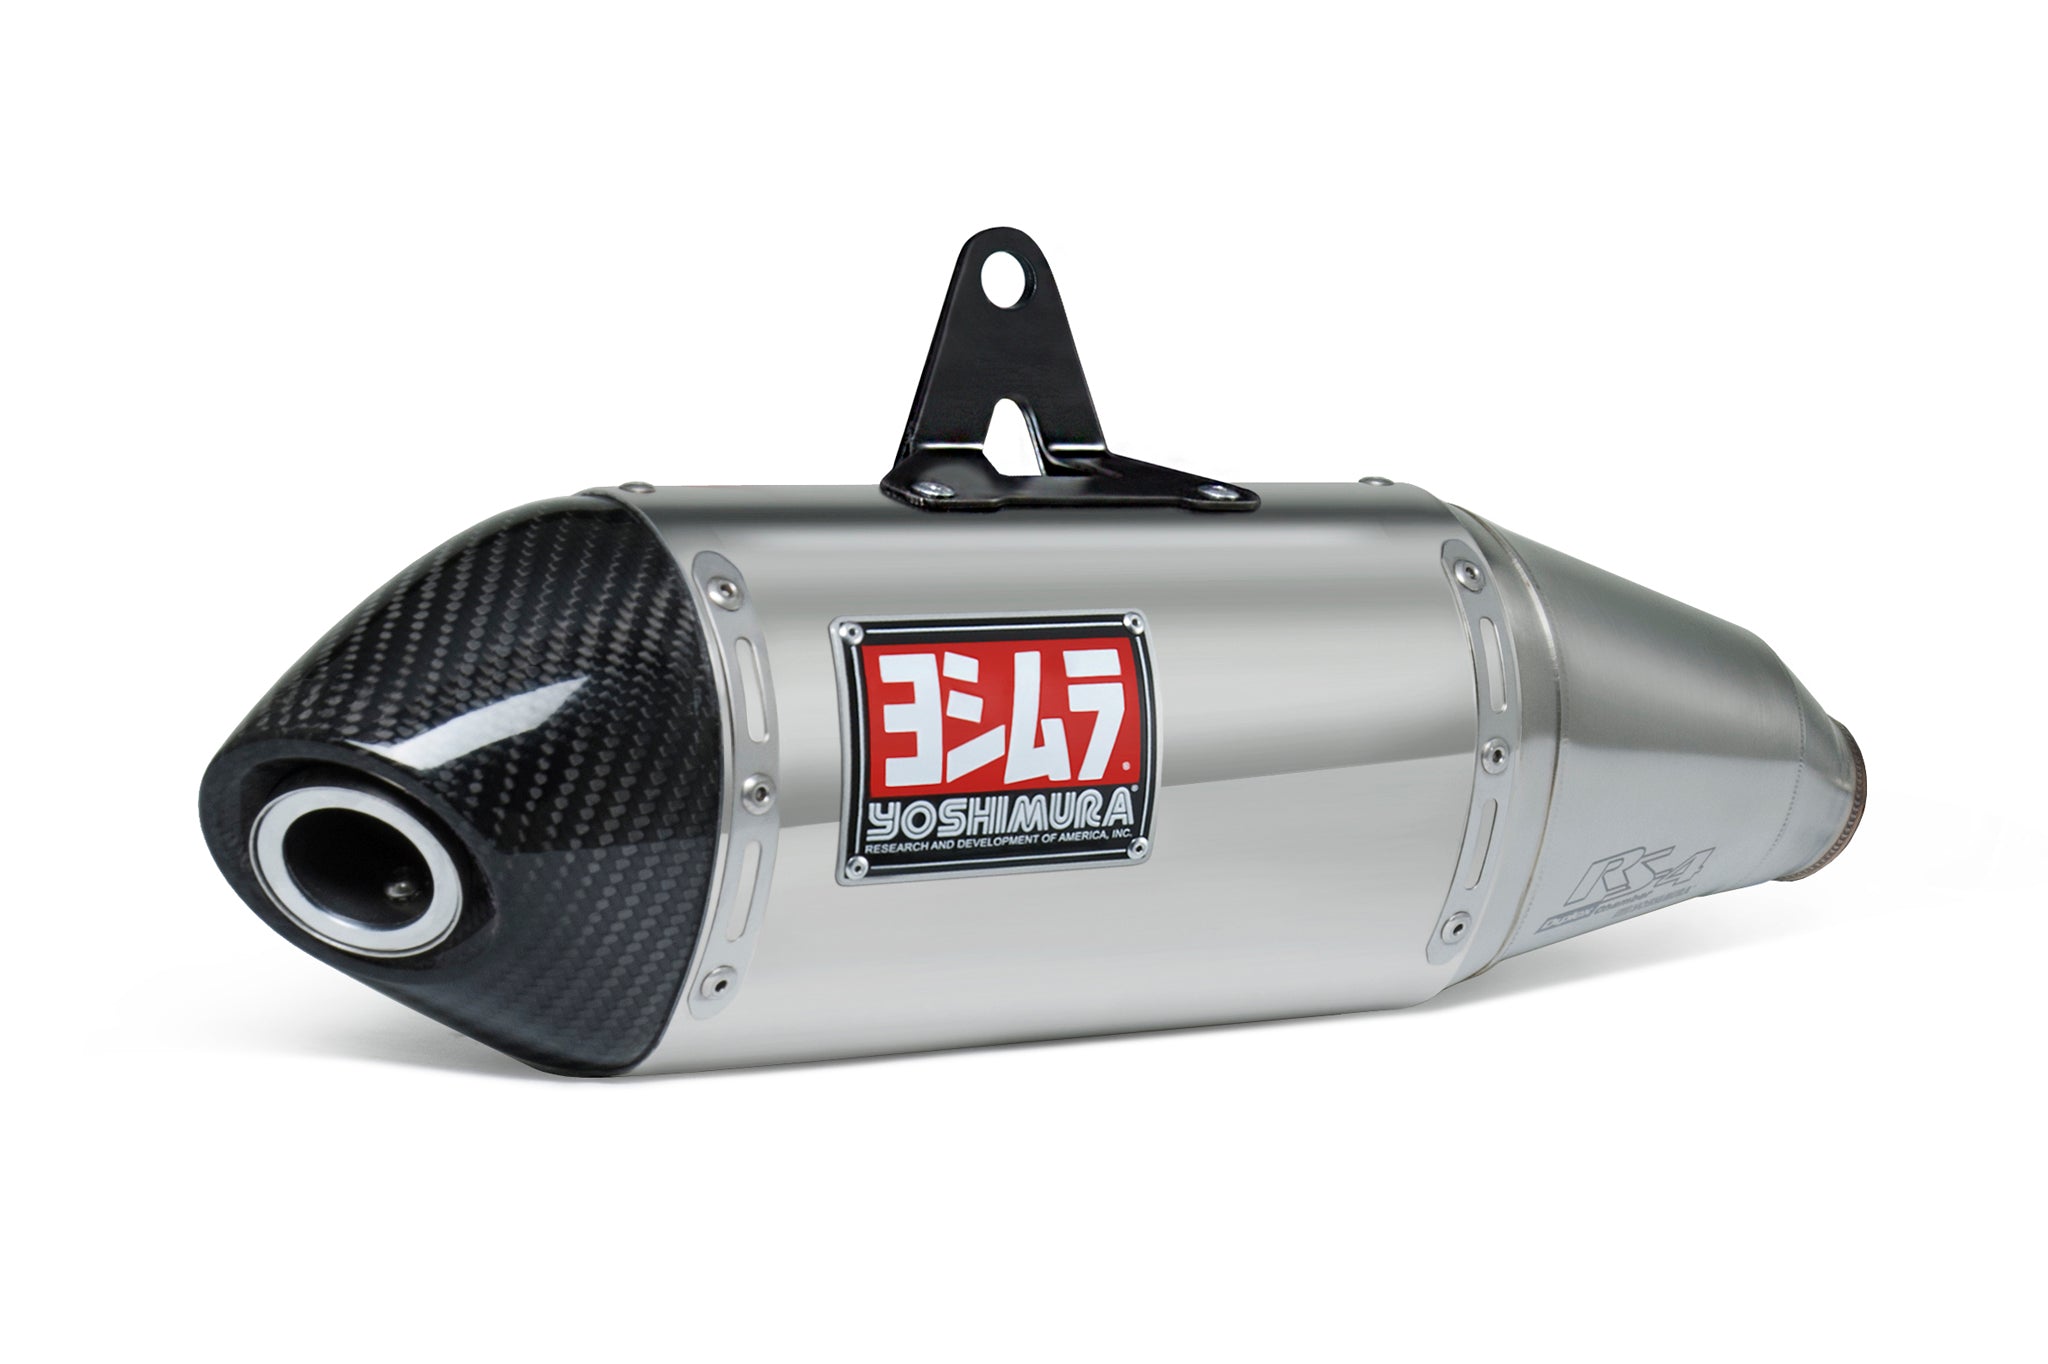 Exhaust Manufacturers Agree On Anti-Tampering Guidelines To Reduce Noise